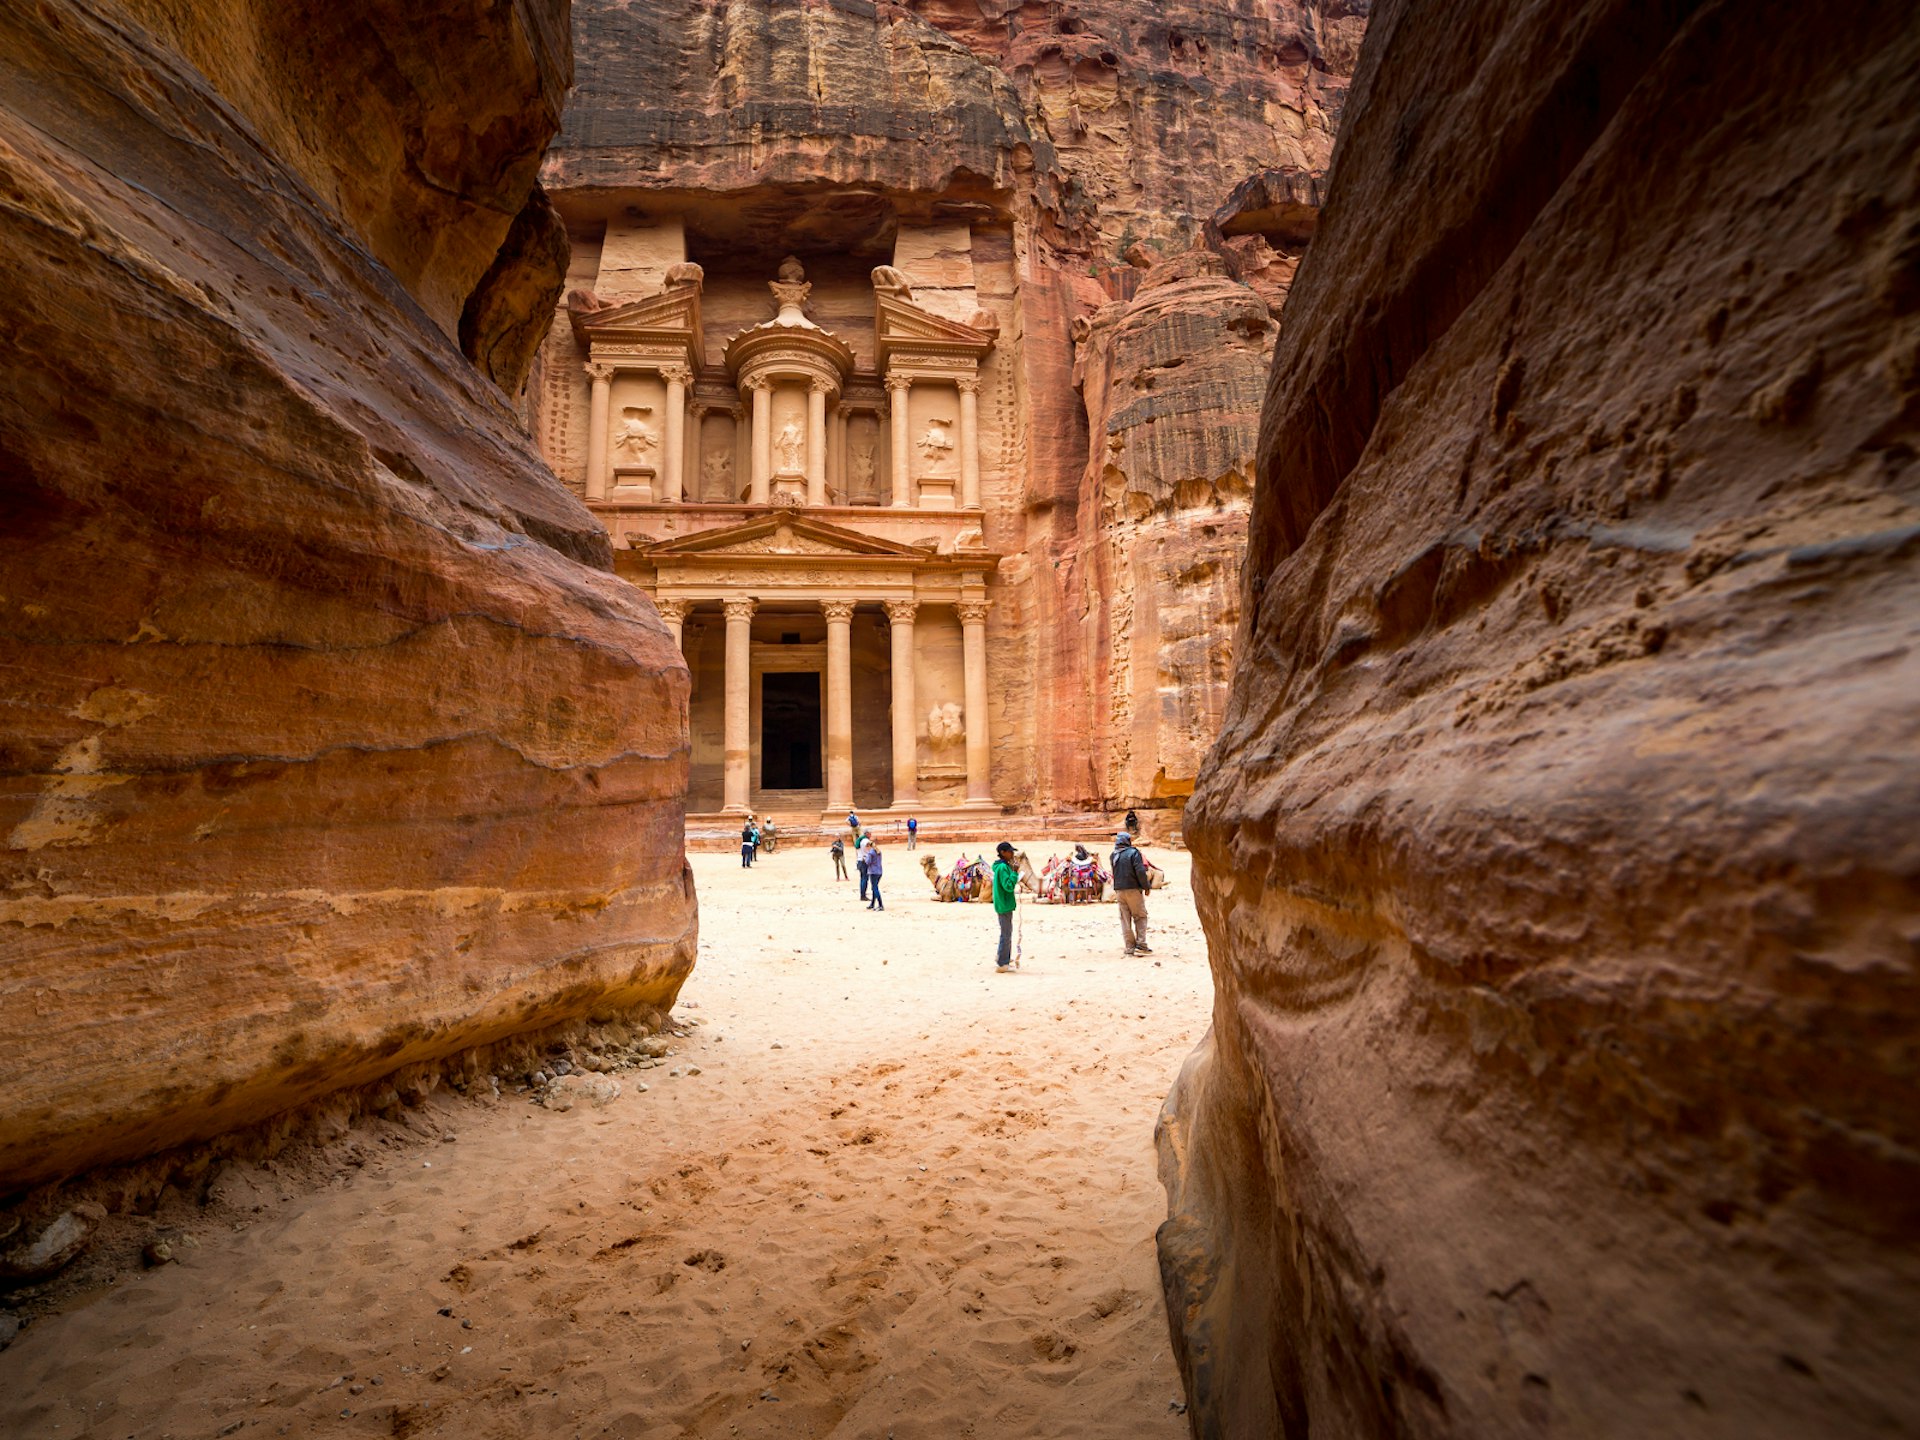 A glimpse of Petra's rock-hewn ancient city through a passageway in the rock. All the rock faces have a red hue, with the carvings themselves appearing more beige